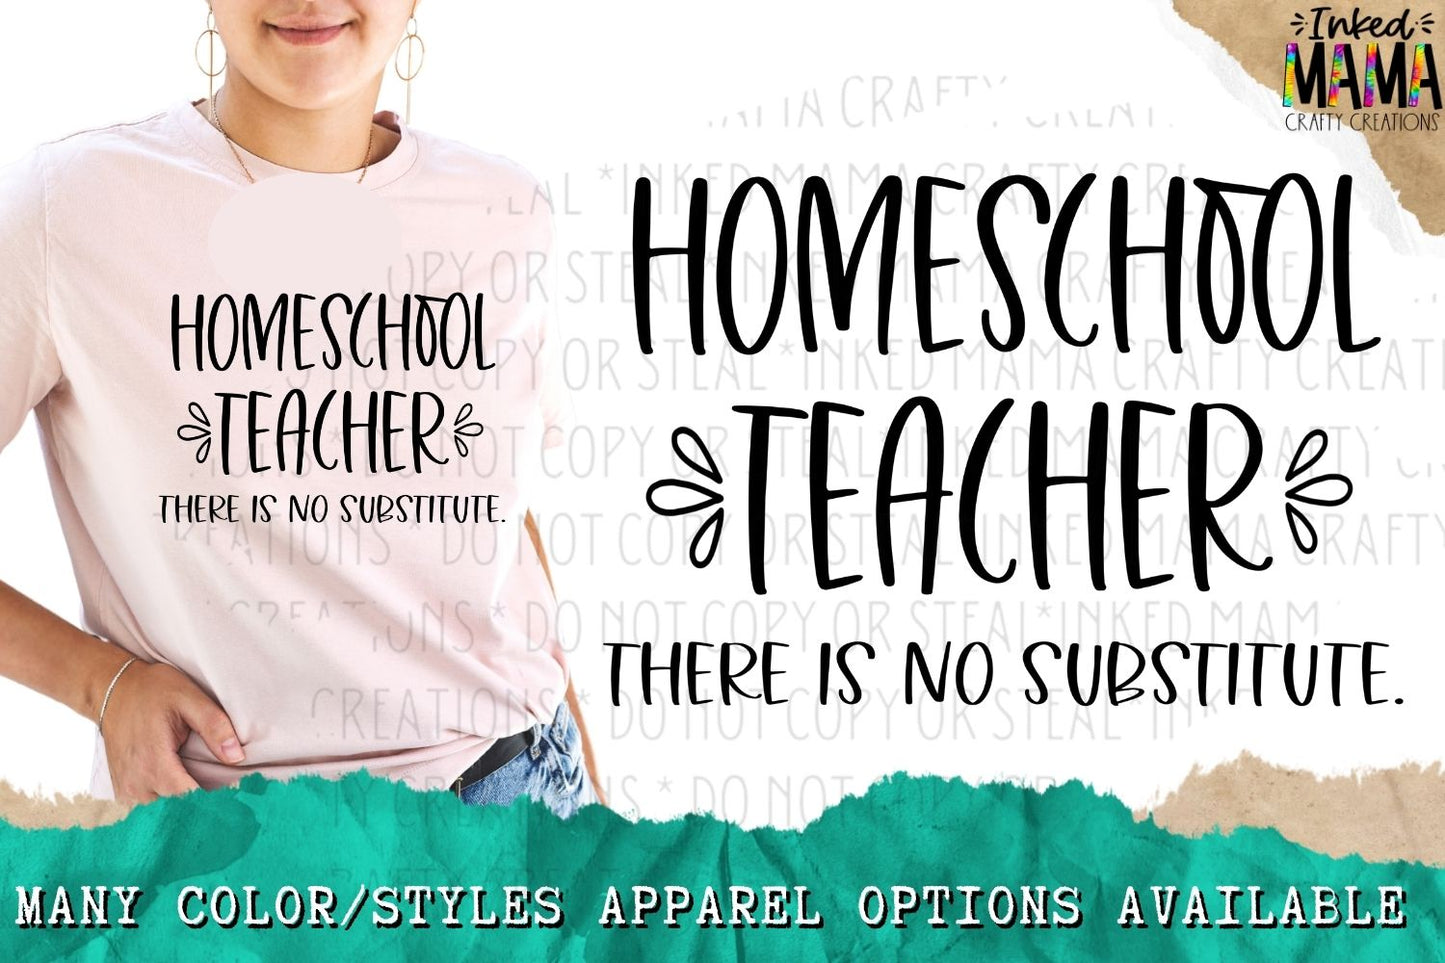 Homeschool Teacher - there is no substitute - Apparel